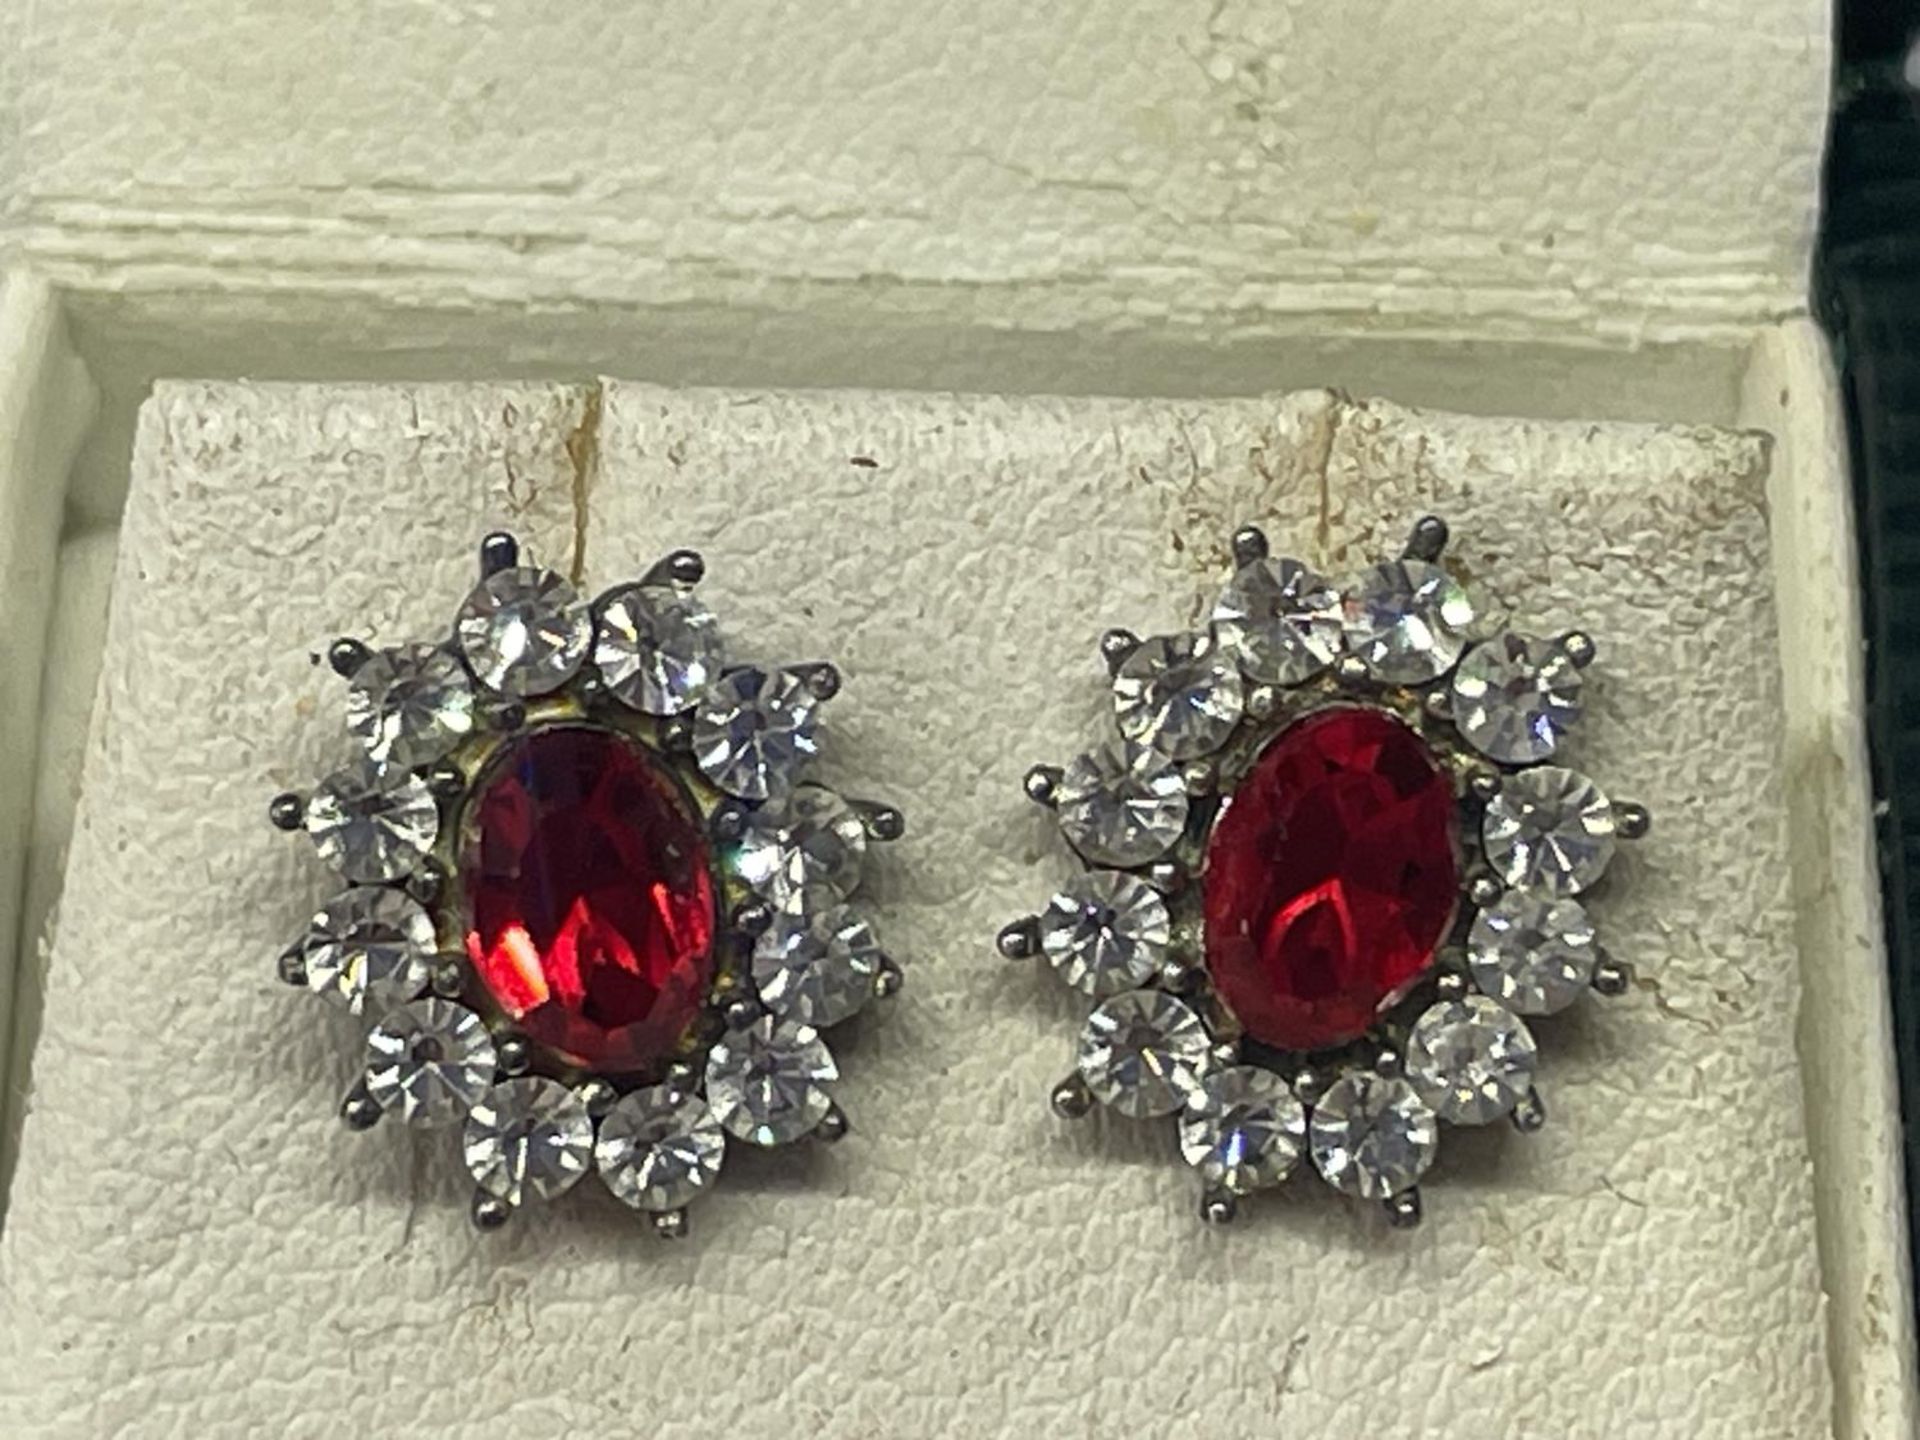 A PAIR OF SILVER AND RED STONE EARRINGS IN A PRESENTATION BOX - Image 2 of 3